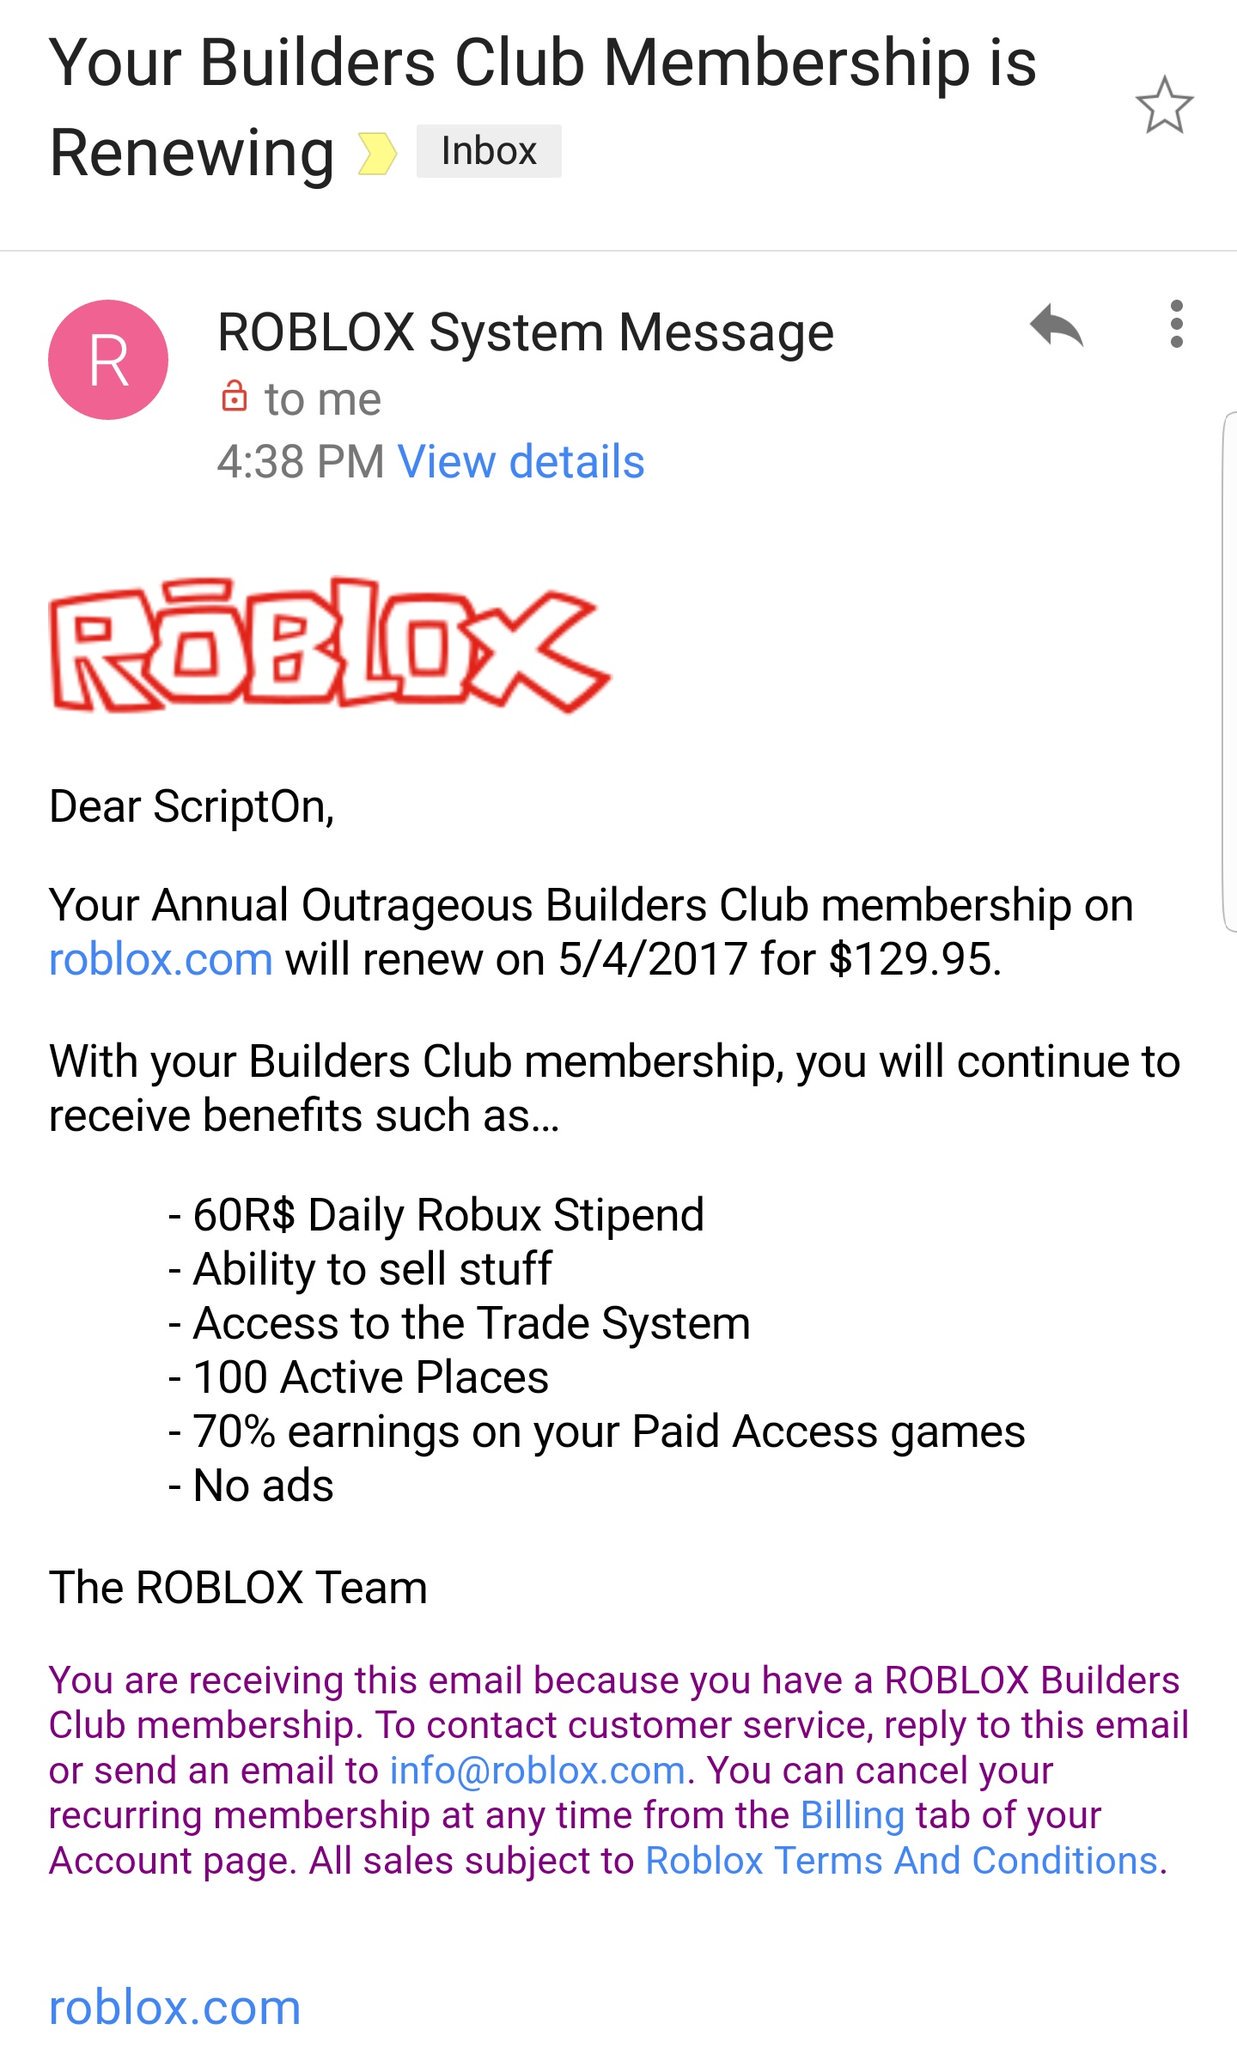 Free Roblox Hair Boy November 2019 - rocashcom on twitter quick robux giveaway reply